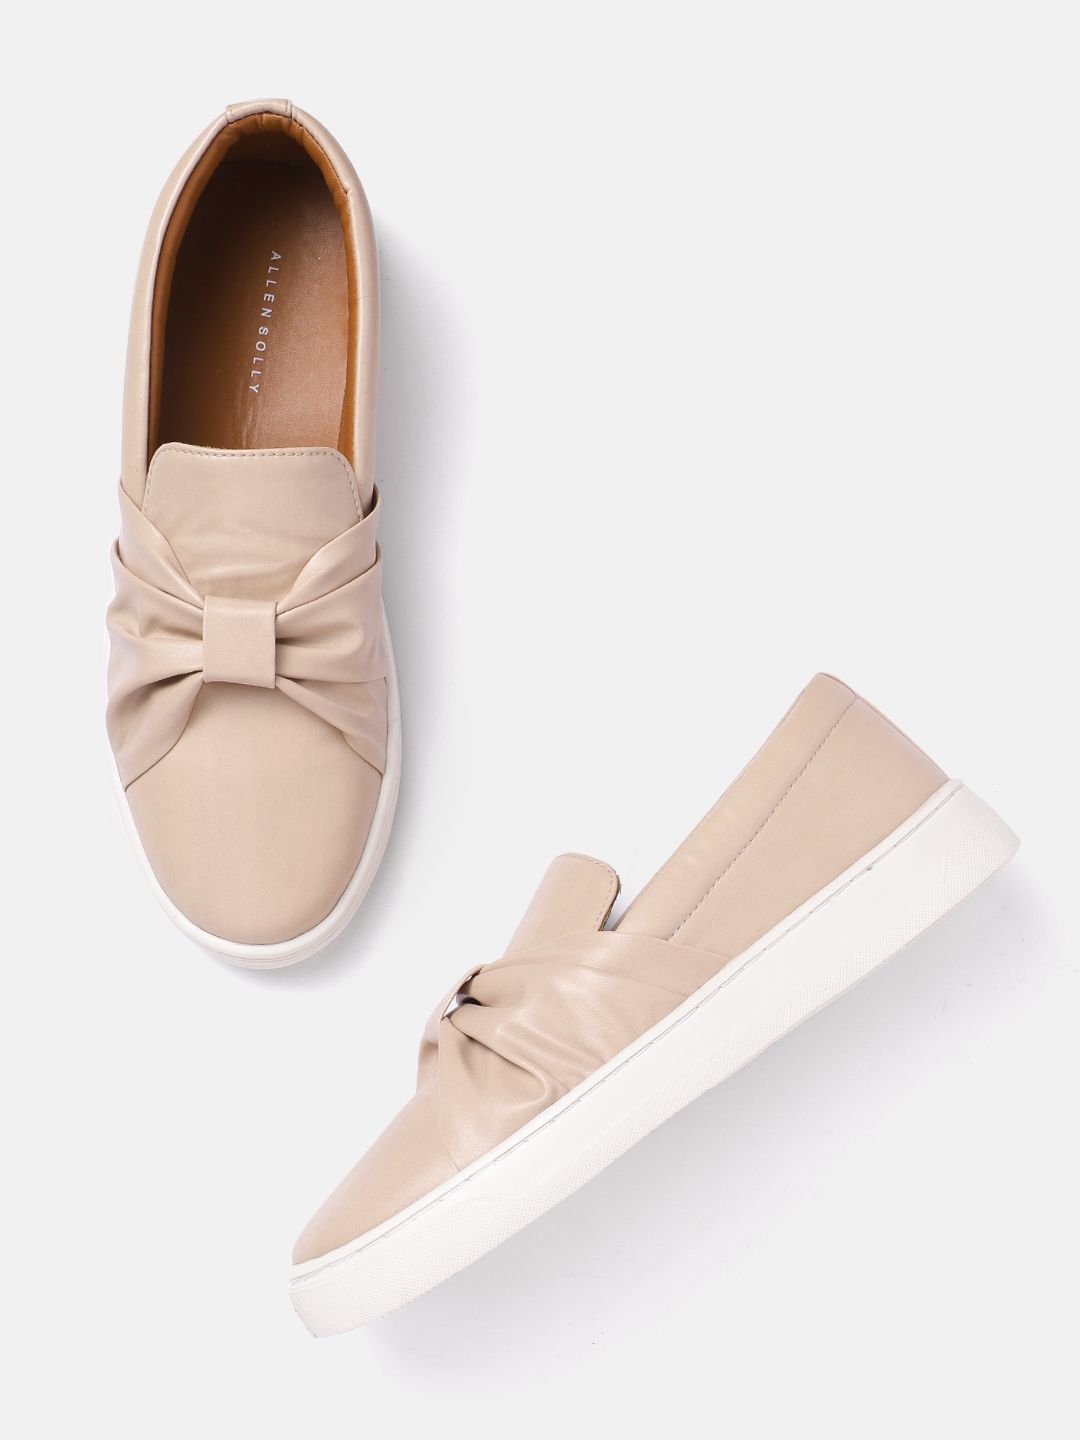 Allen Solly Women Slip-On Sneakers with Bow Detail Price in India